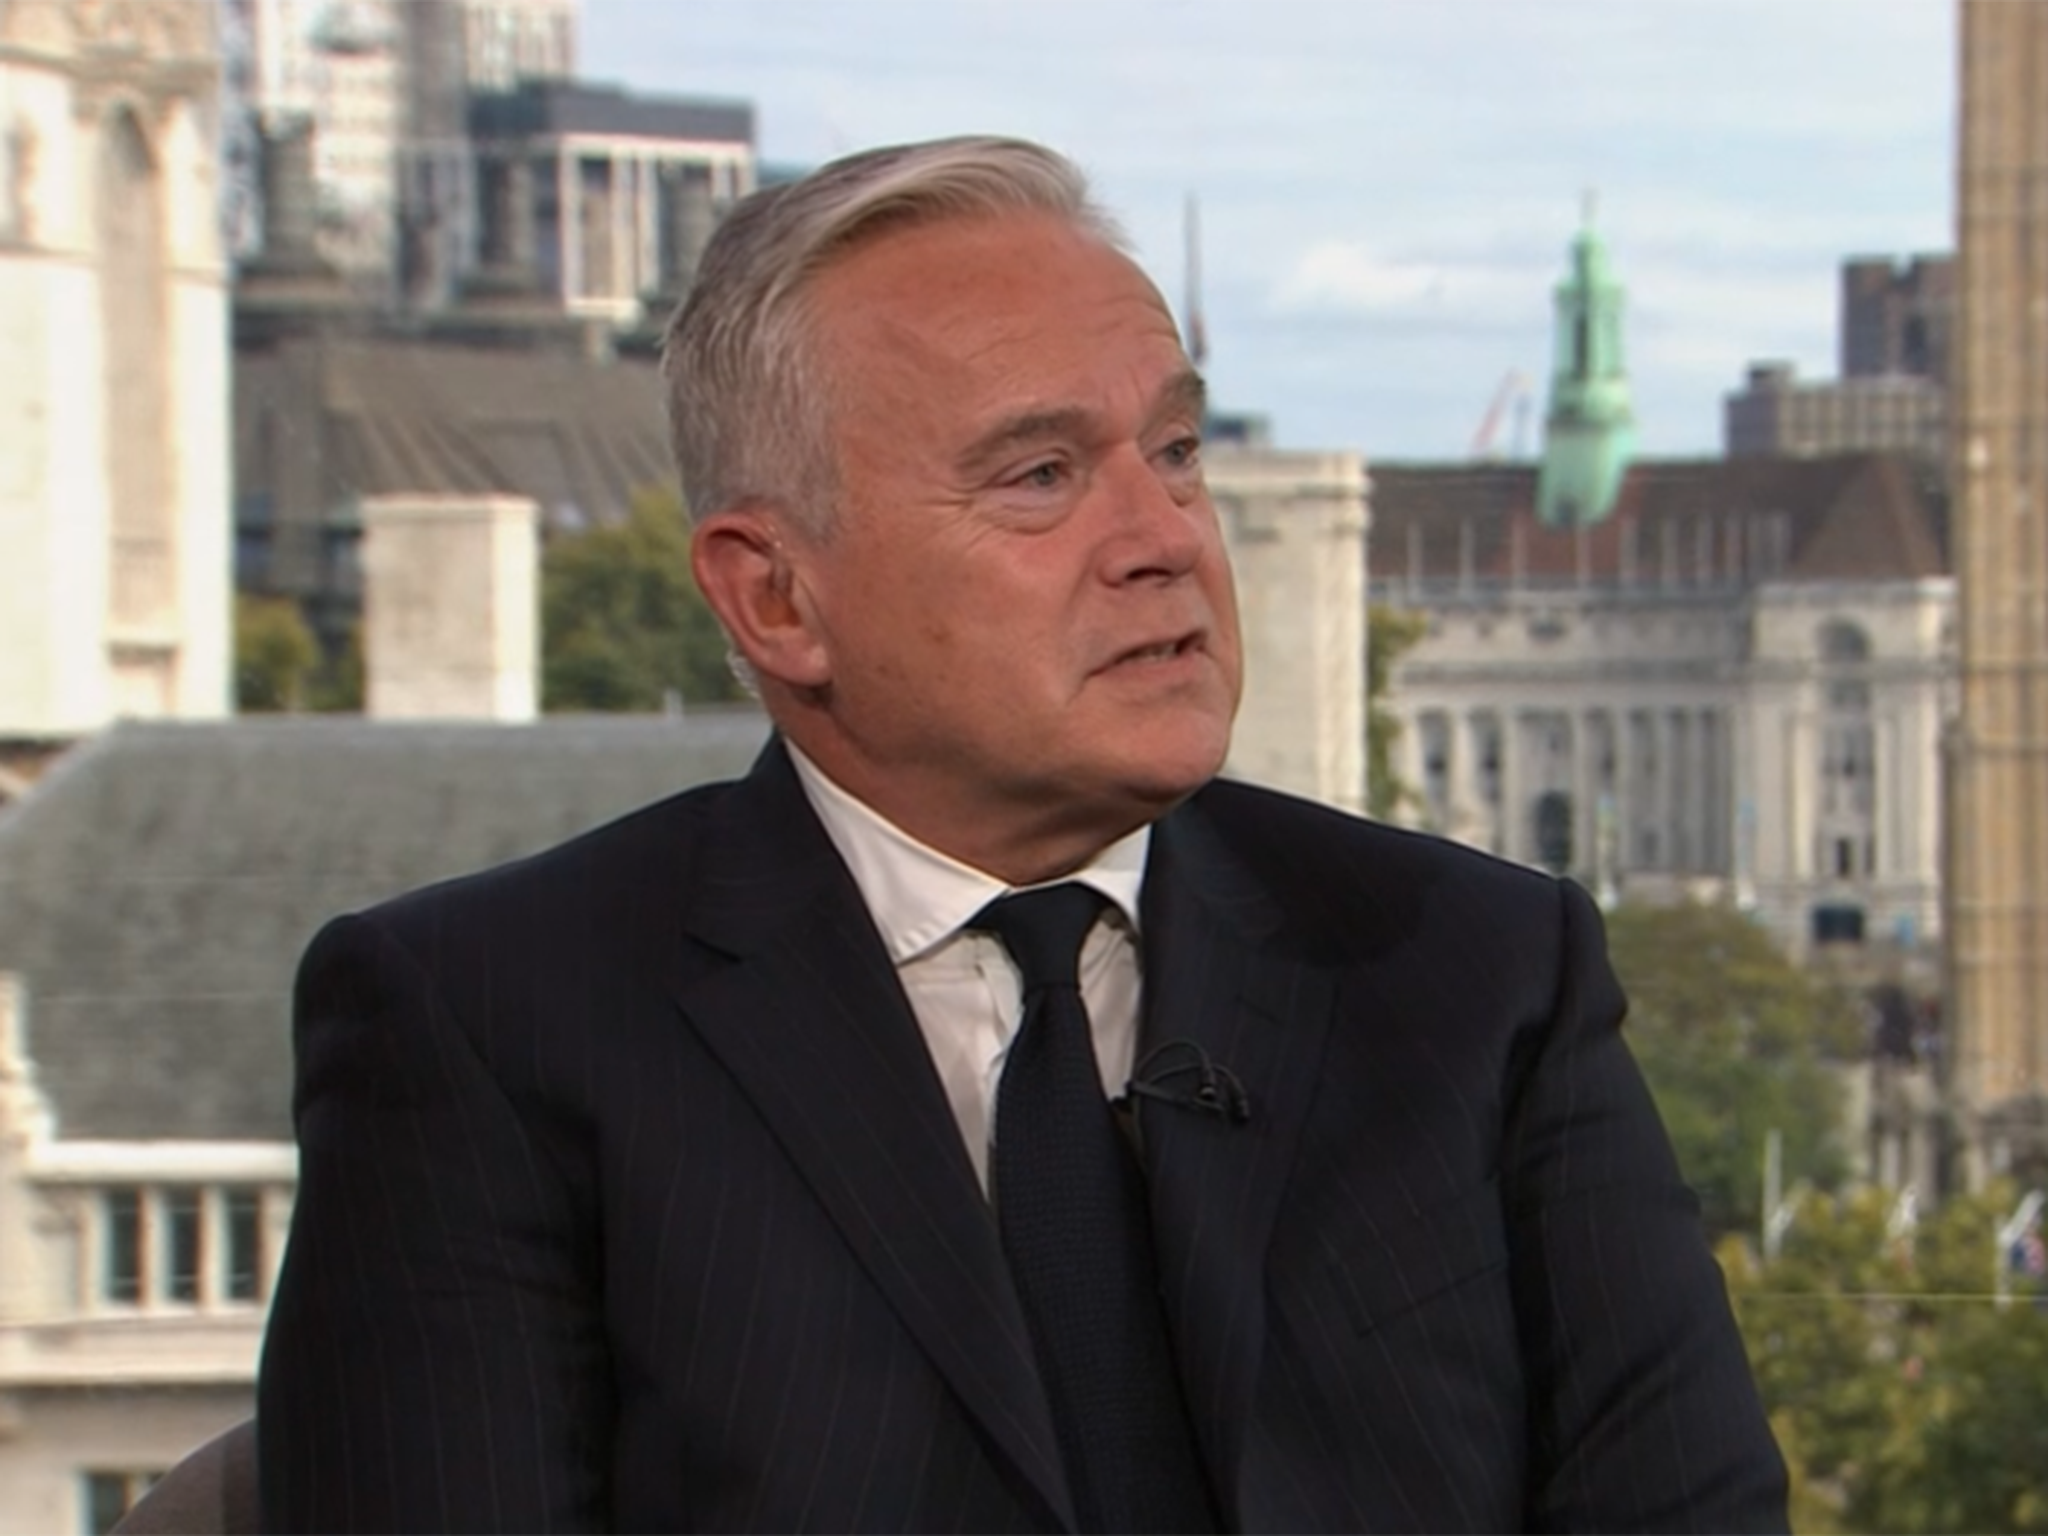 Huw Edwards against the backdrop of Westminster Abbey